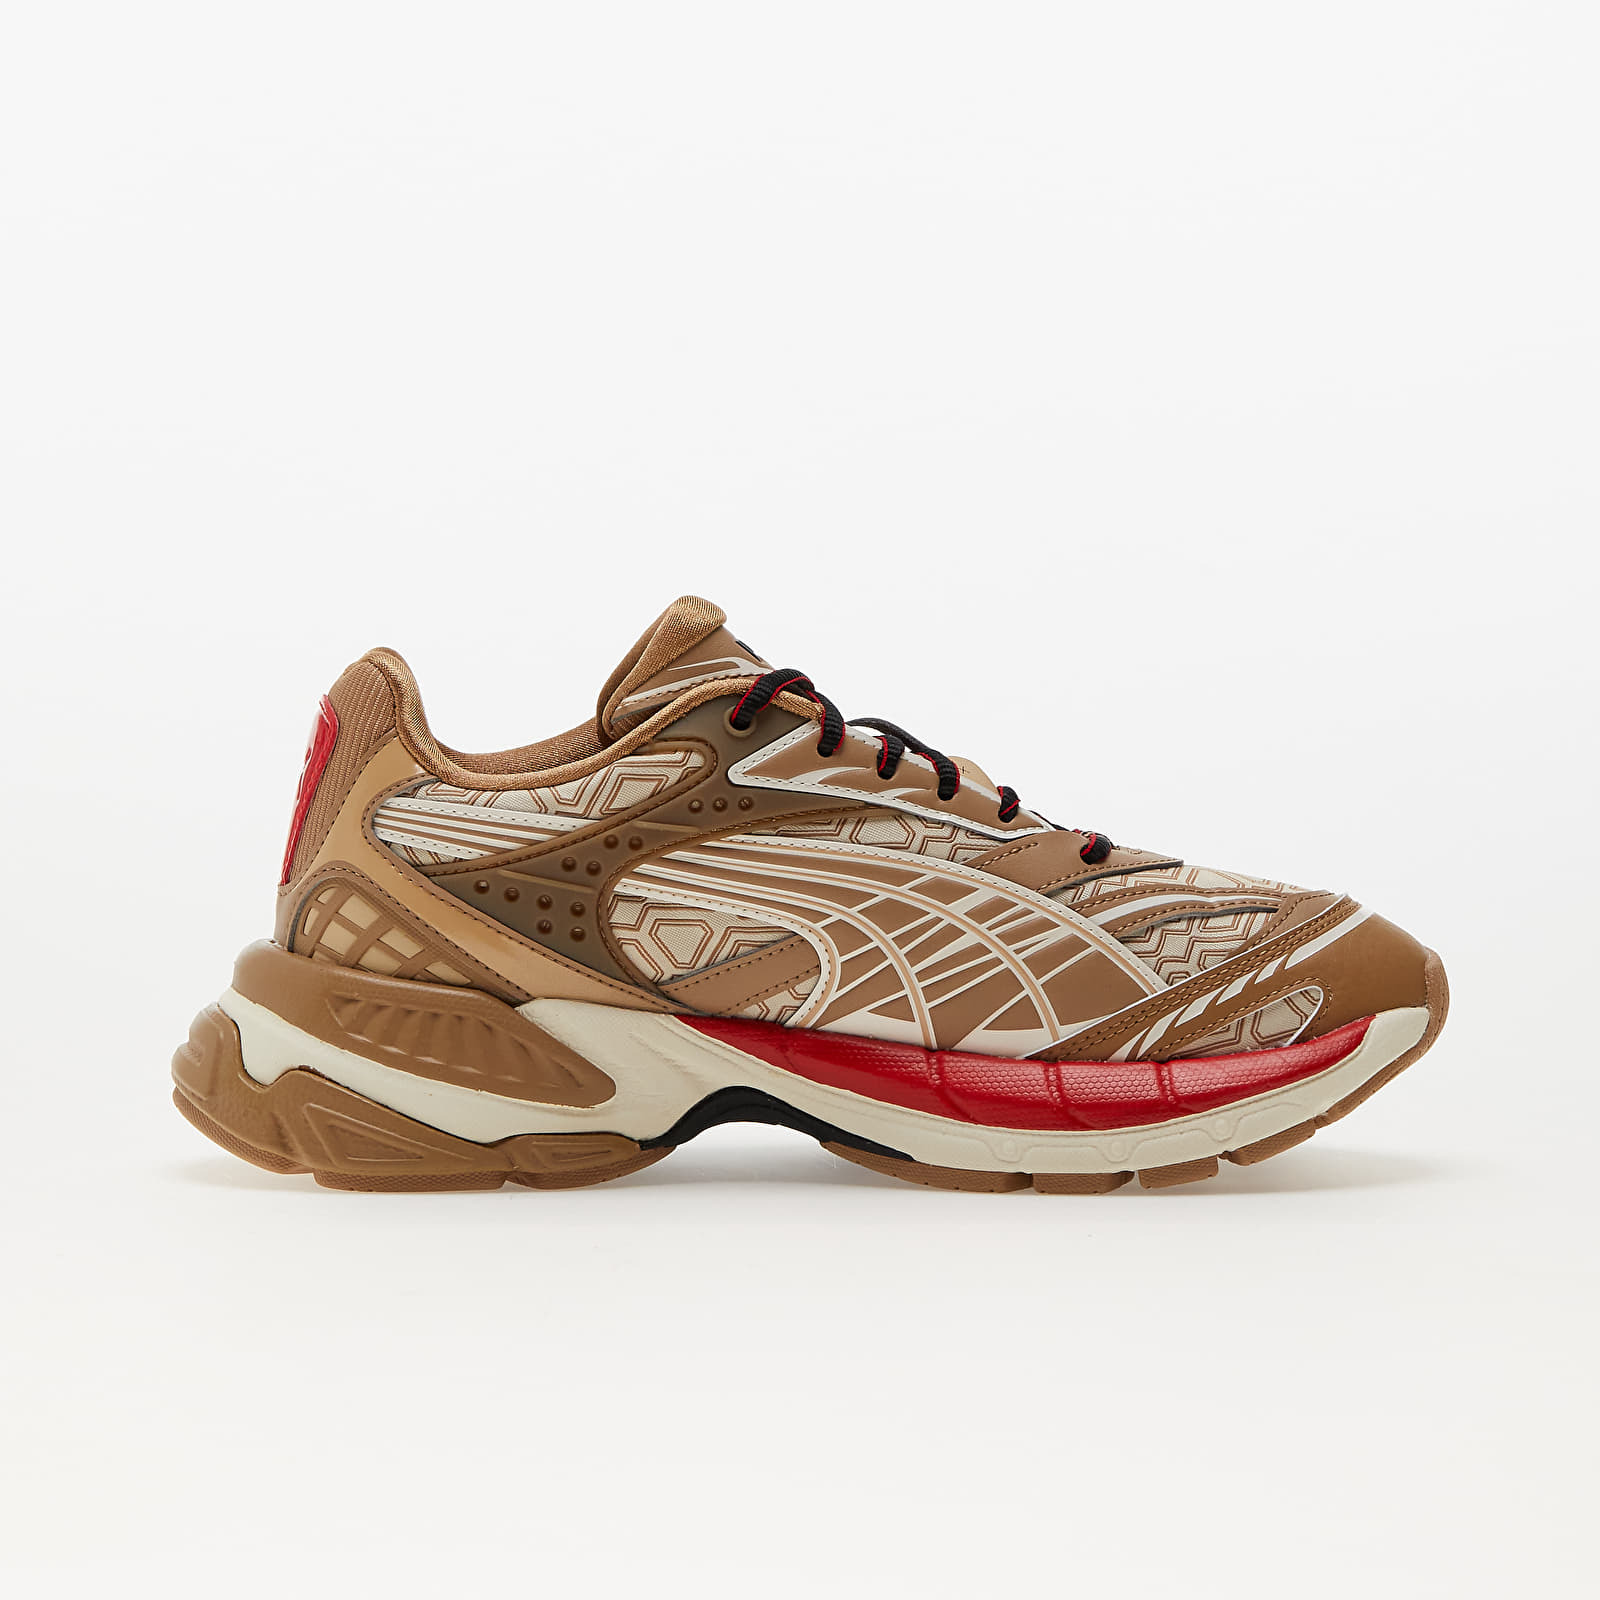 Puma Velophasis Luxe Sport Frosted Ivory-Tiger S Eye